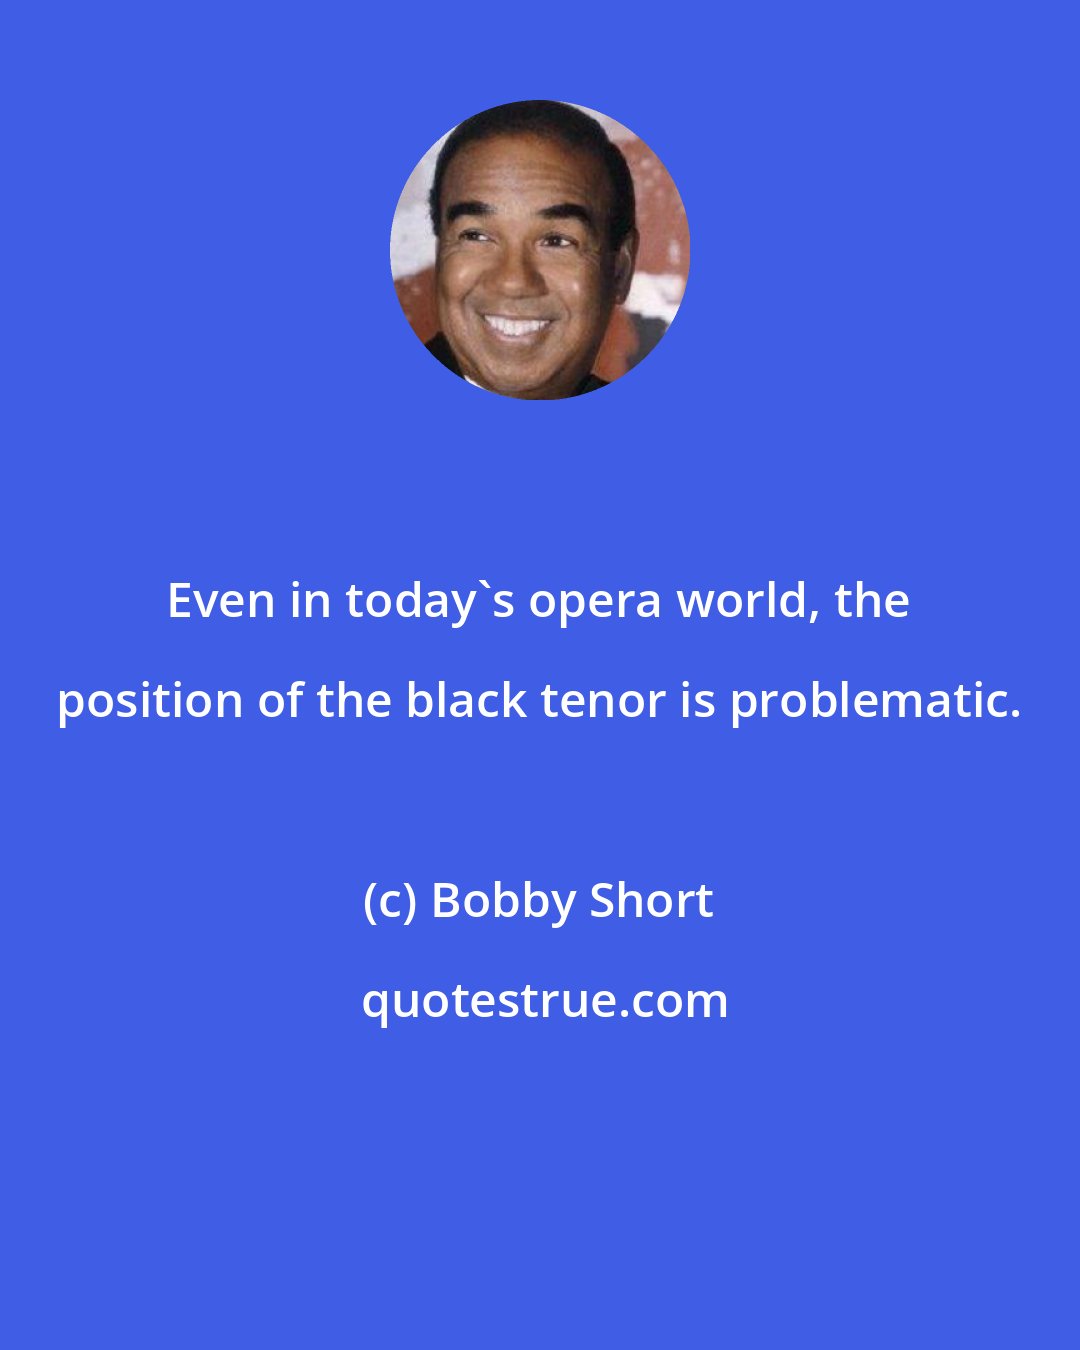 Bobby Short: Even in today's opera world, the position of the black tenor is problematic.